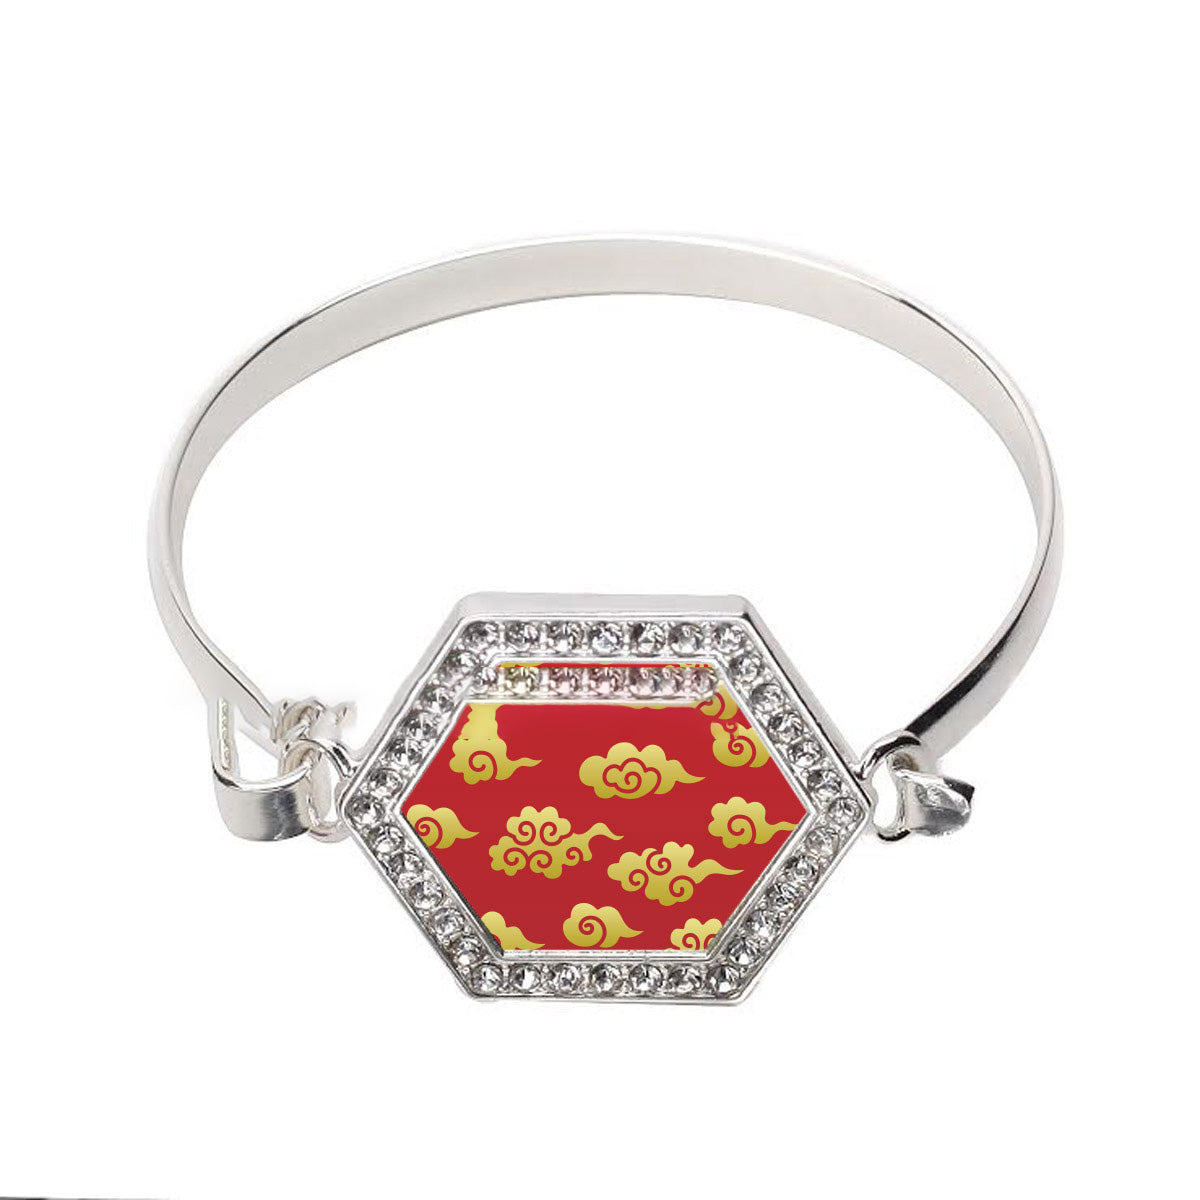 Silver Gold Chinese New Year Cloud Pattern Hexagon Charm Bangle Bracelet